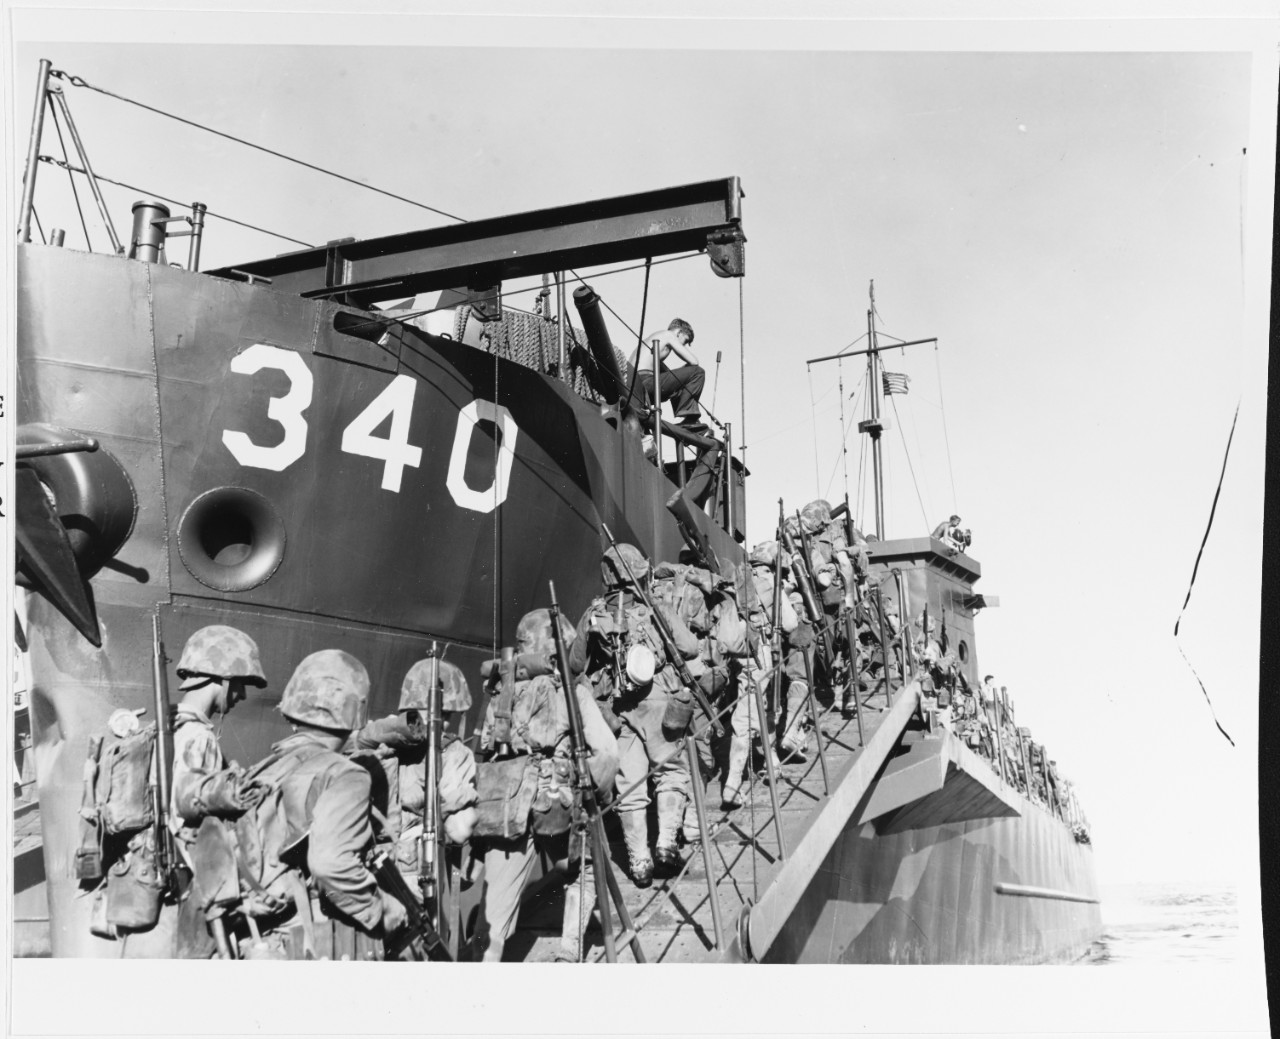 Marines boarding USS LCI-340 on the day before Christmas, 1943